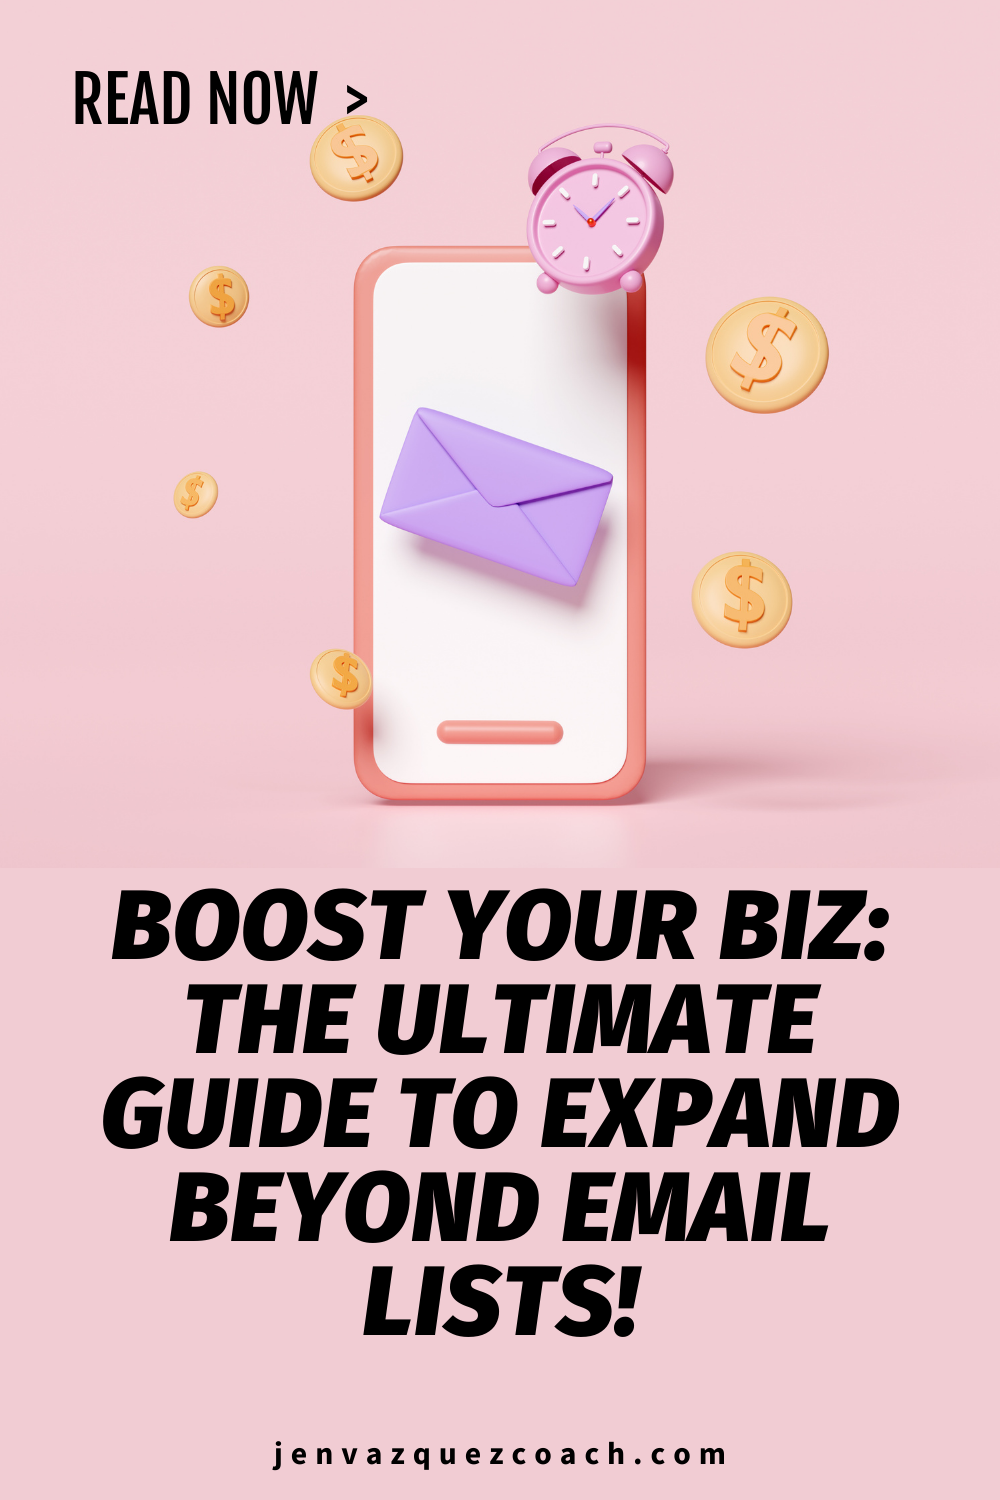 Learn how lead magnets can grow your business not just your email list by Jen Vazquez Media 